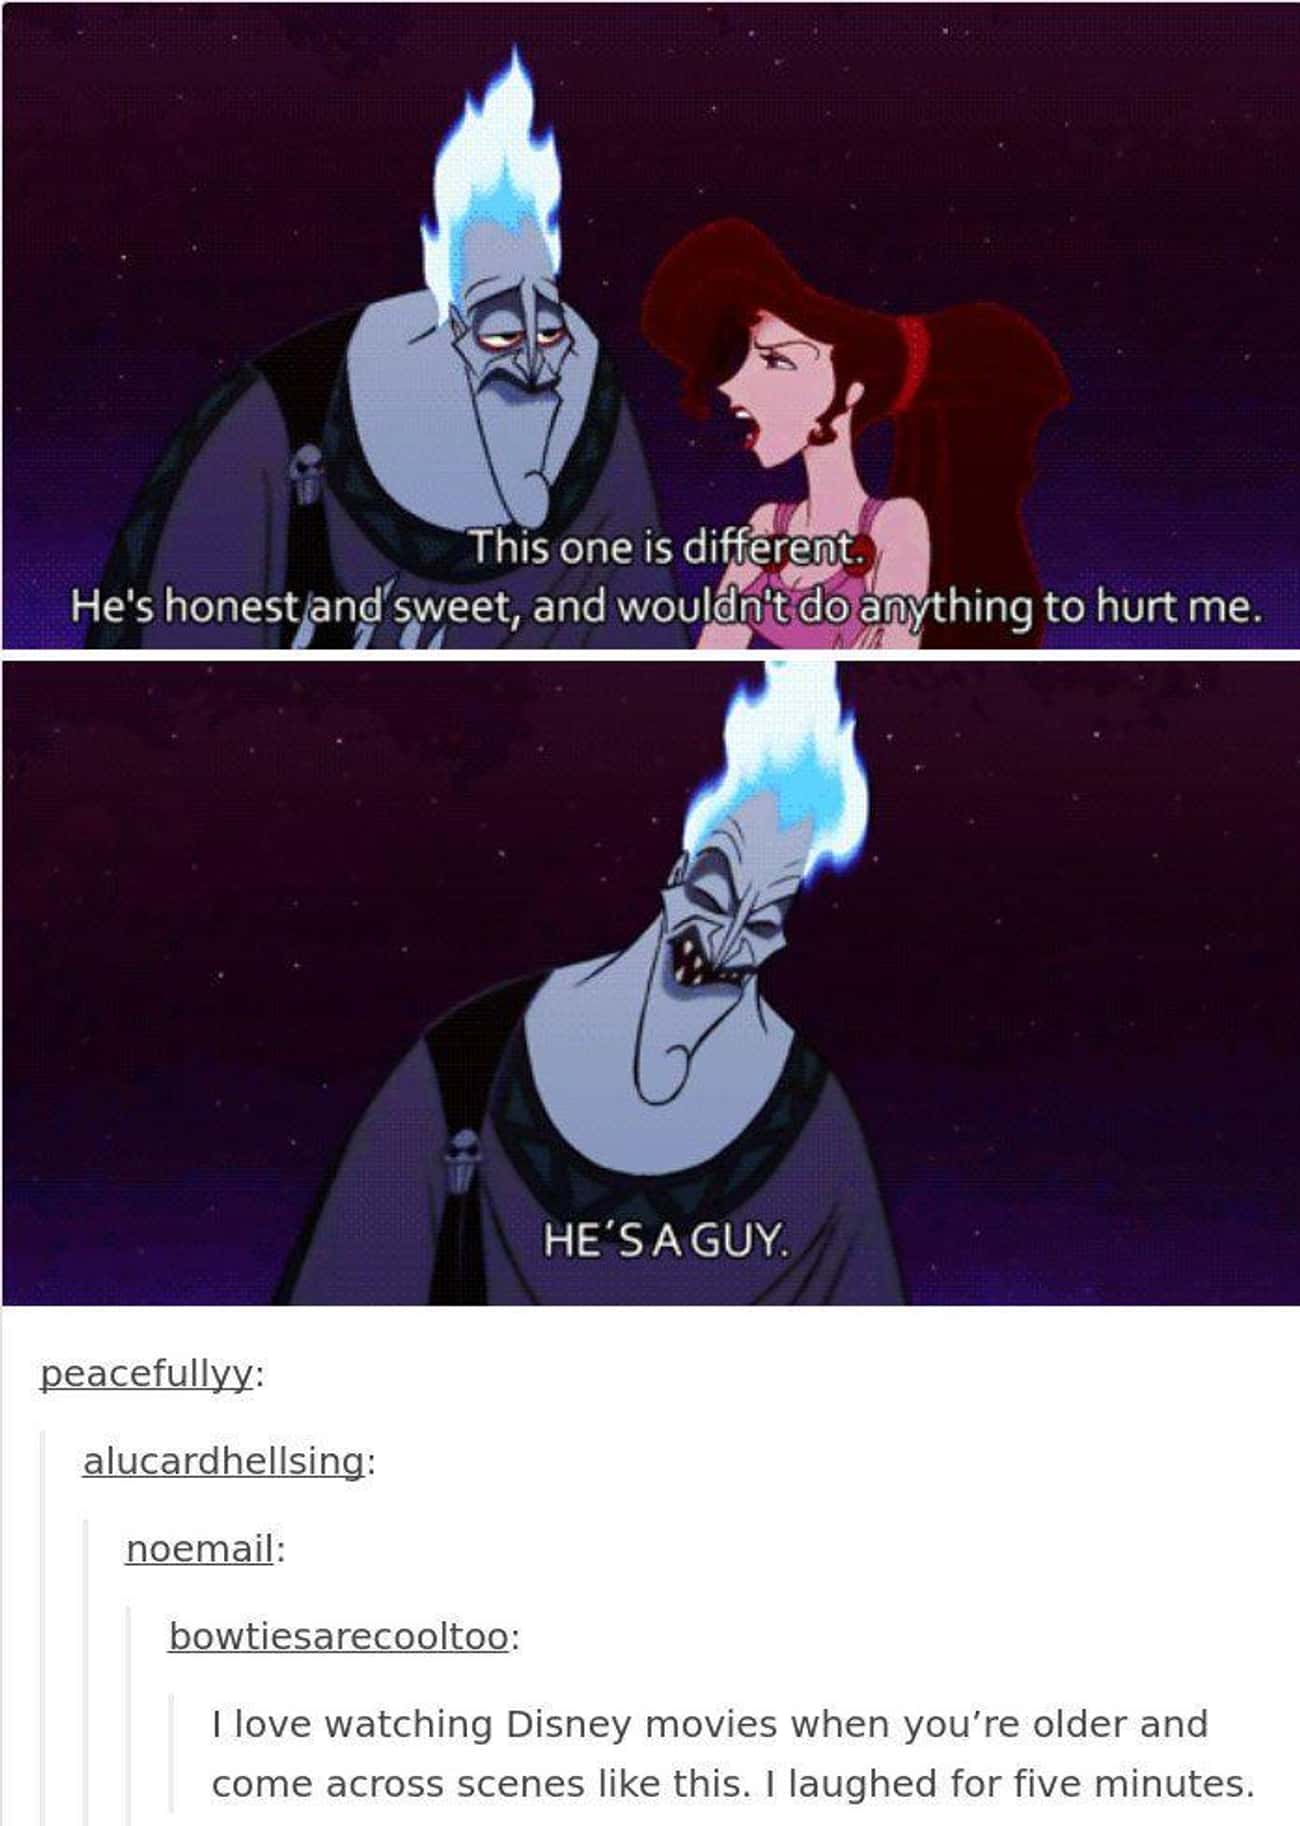 Hades Knows The True Nature Of Men